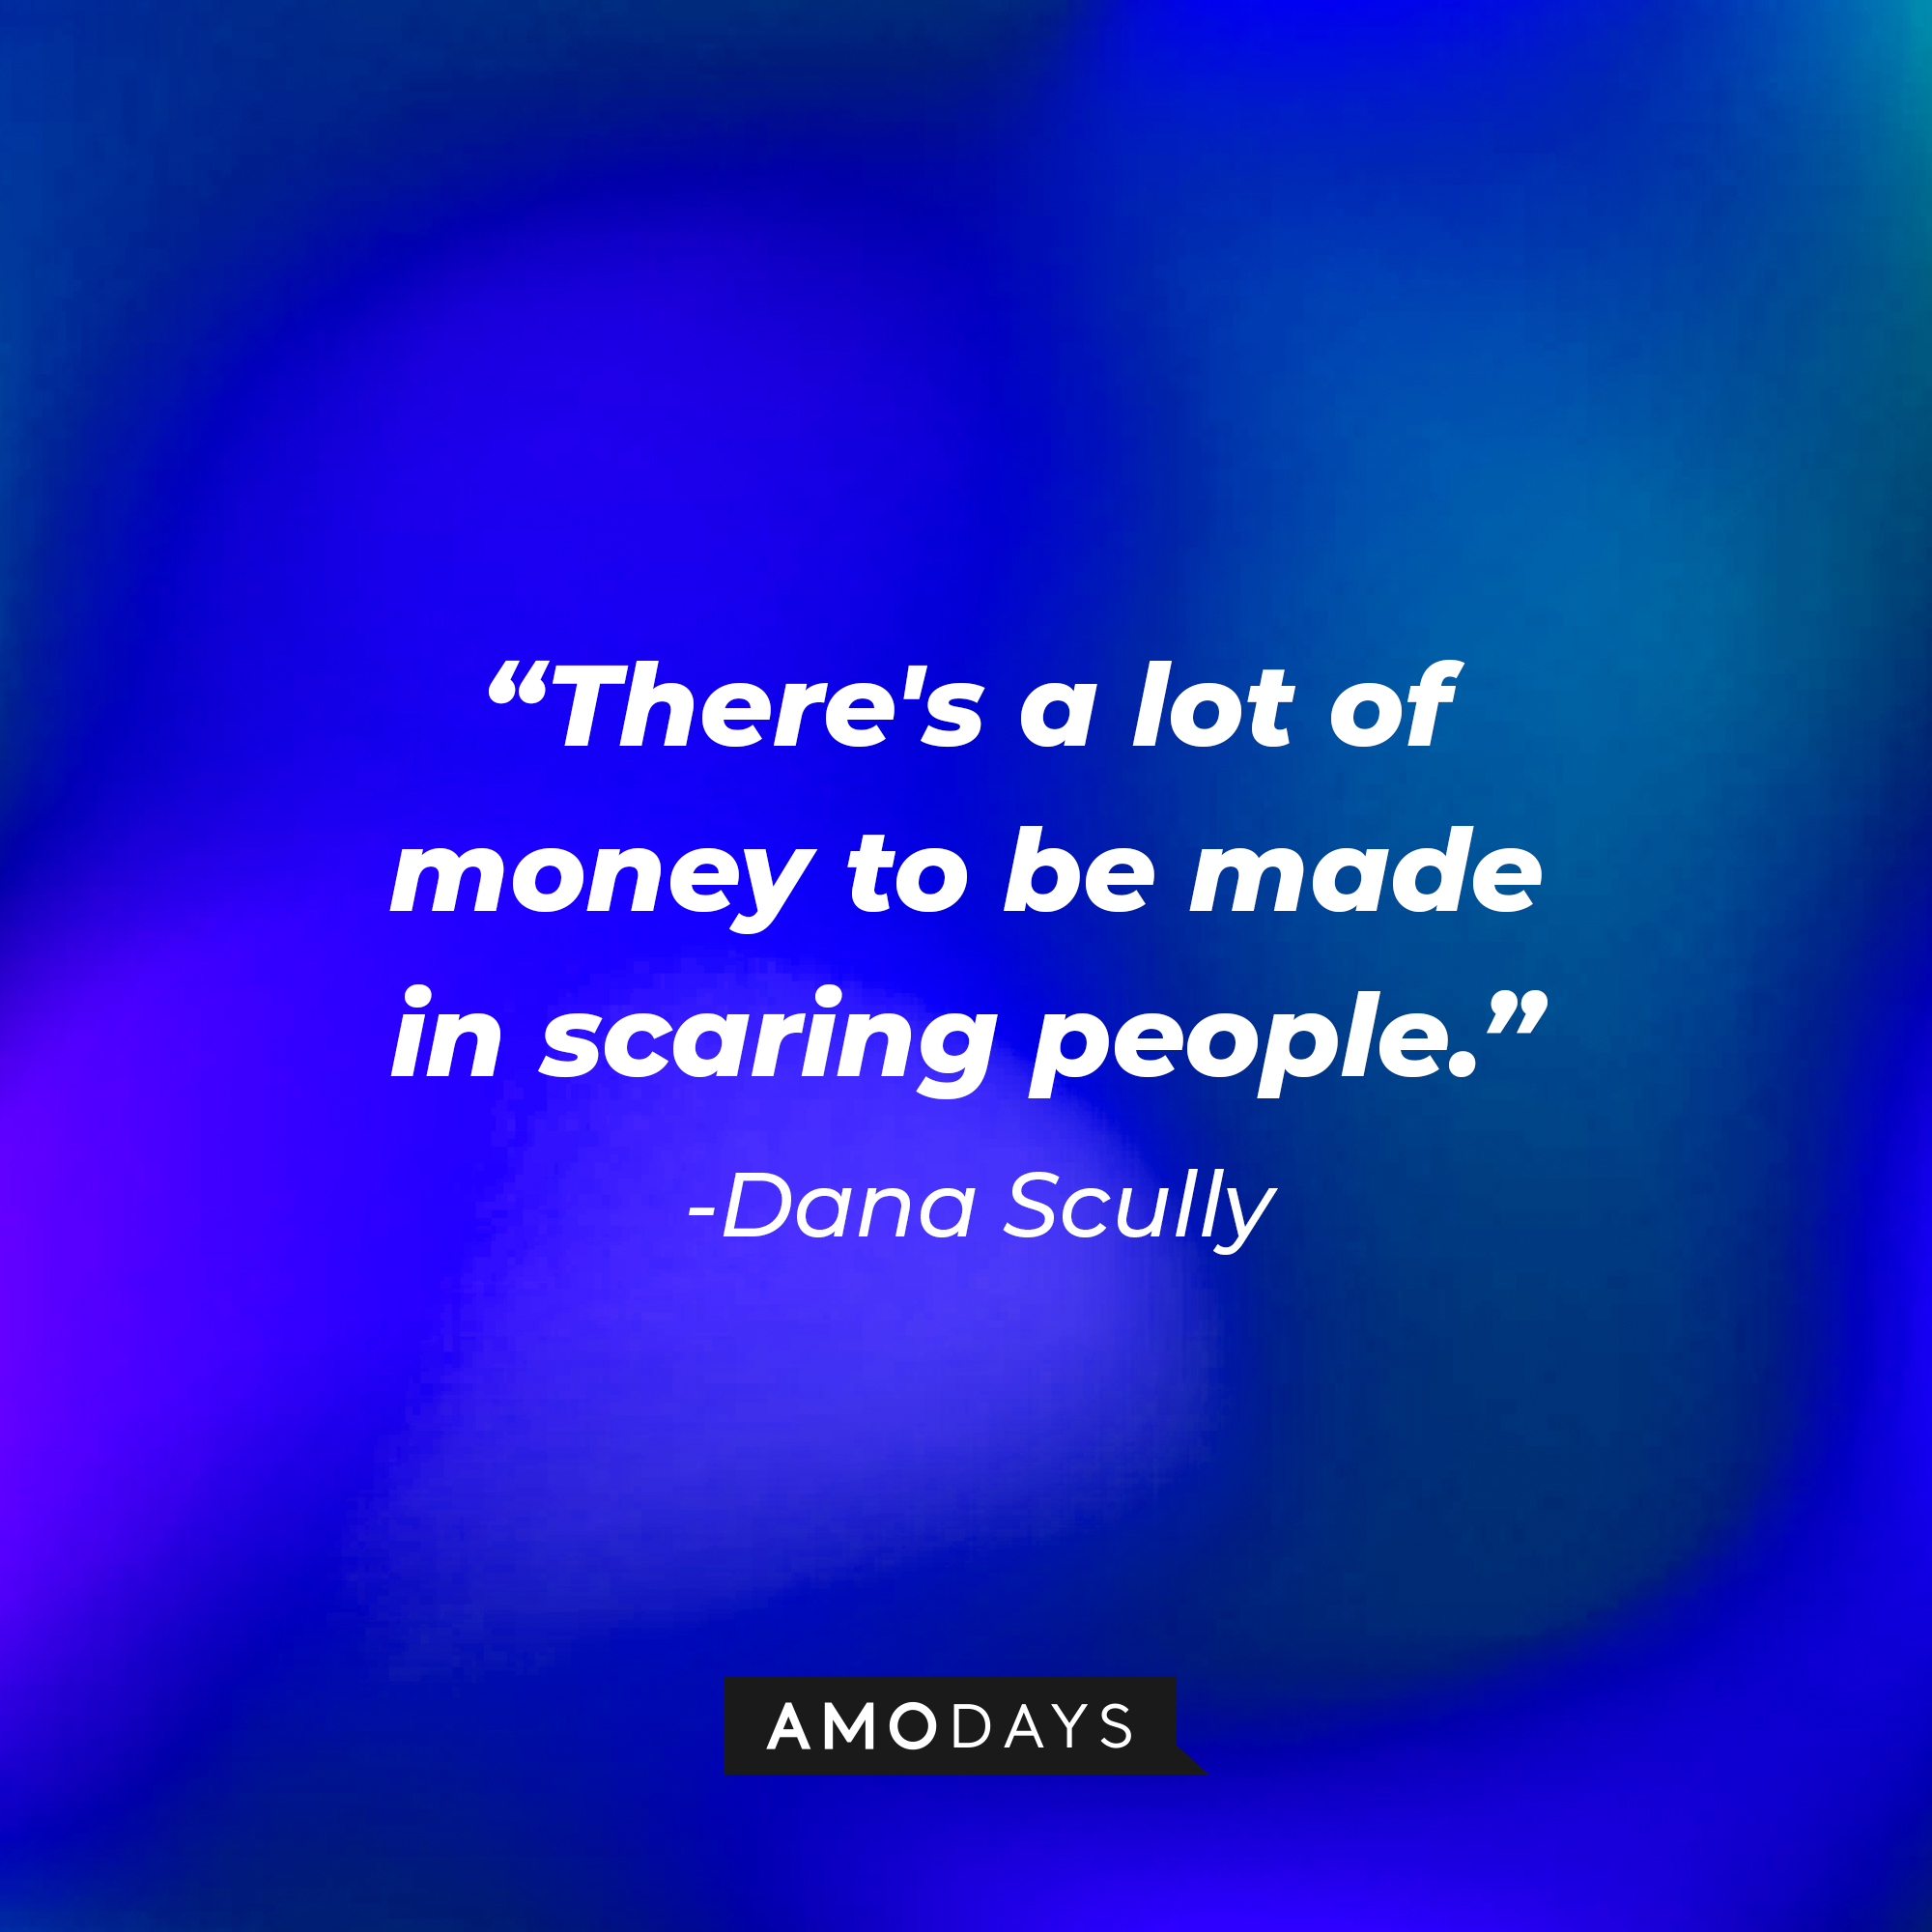 Dana Scully's quote: "There's a lot of money to be made in scaring people." | Source: AmoDays